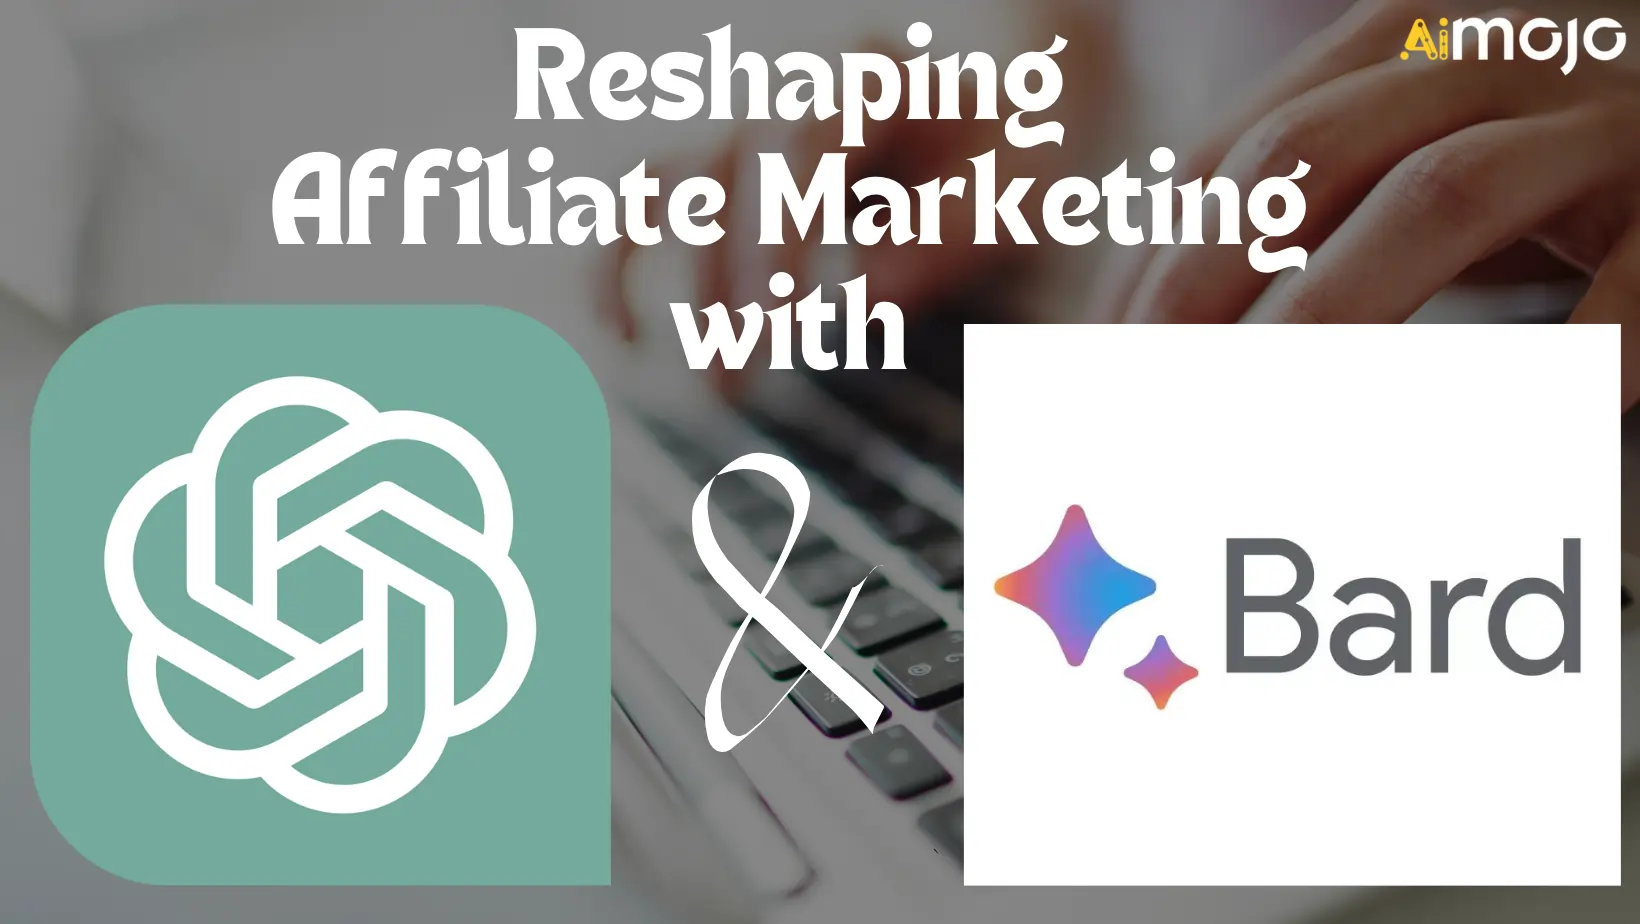 Reshaping Affiliate Marketing with ChatGPT and Google Bard